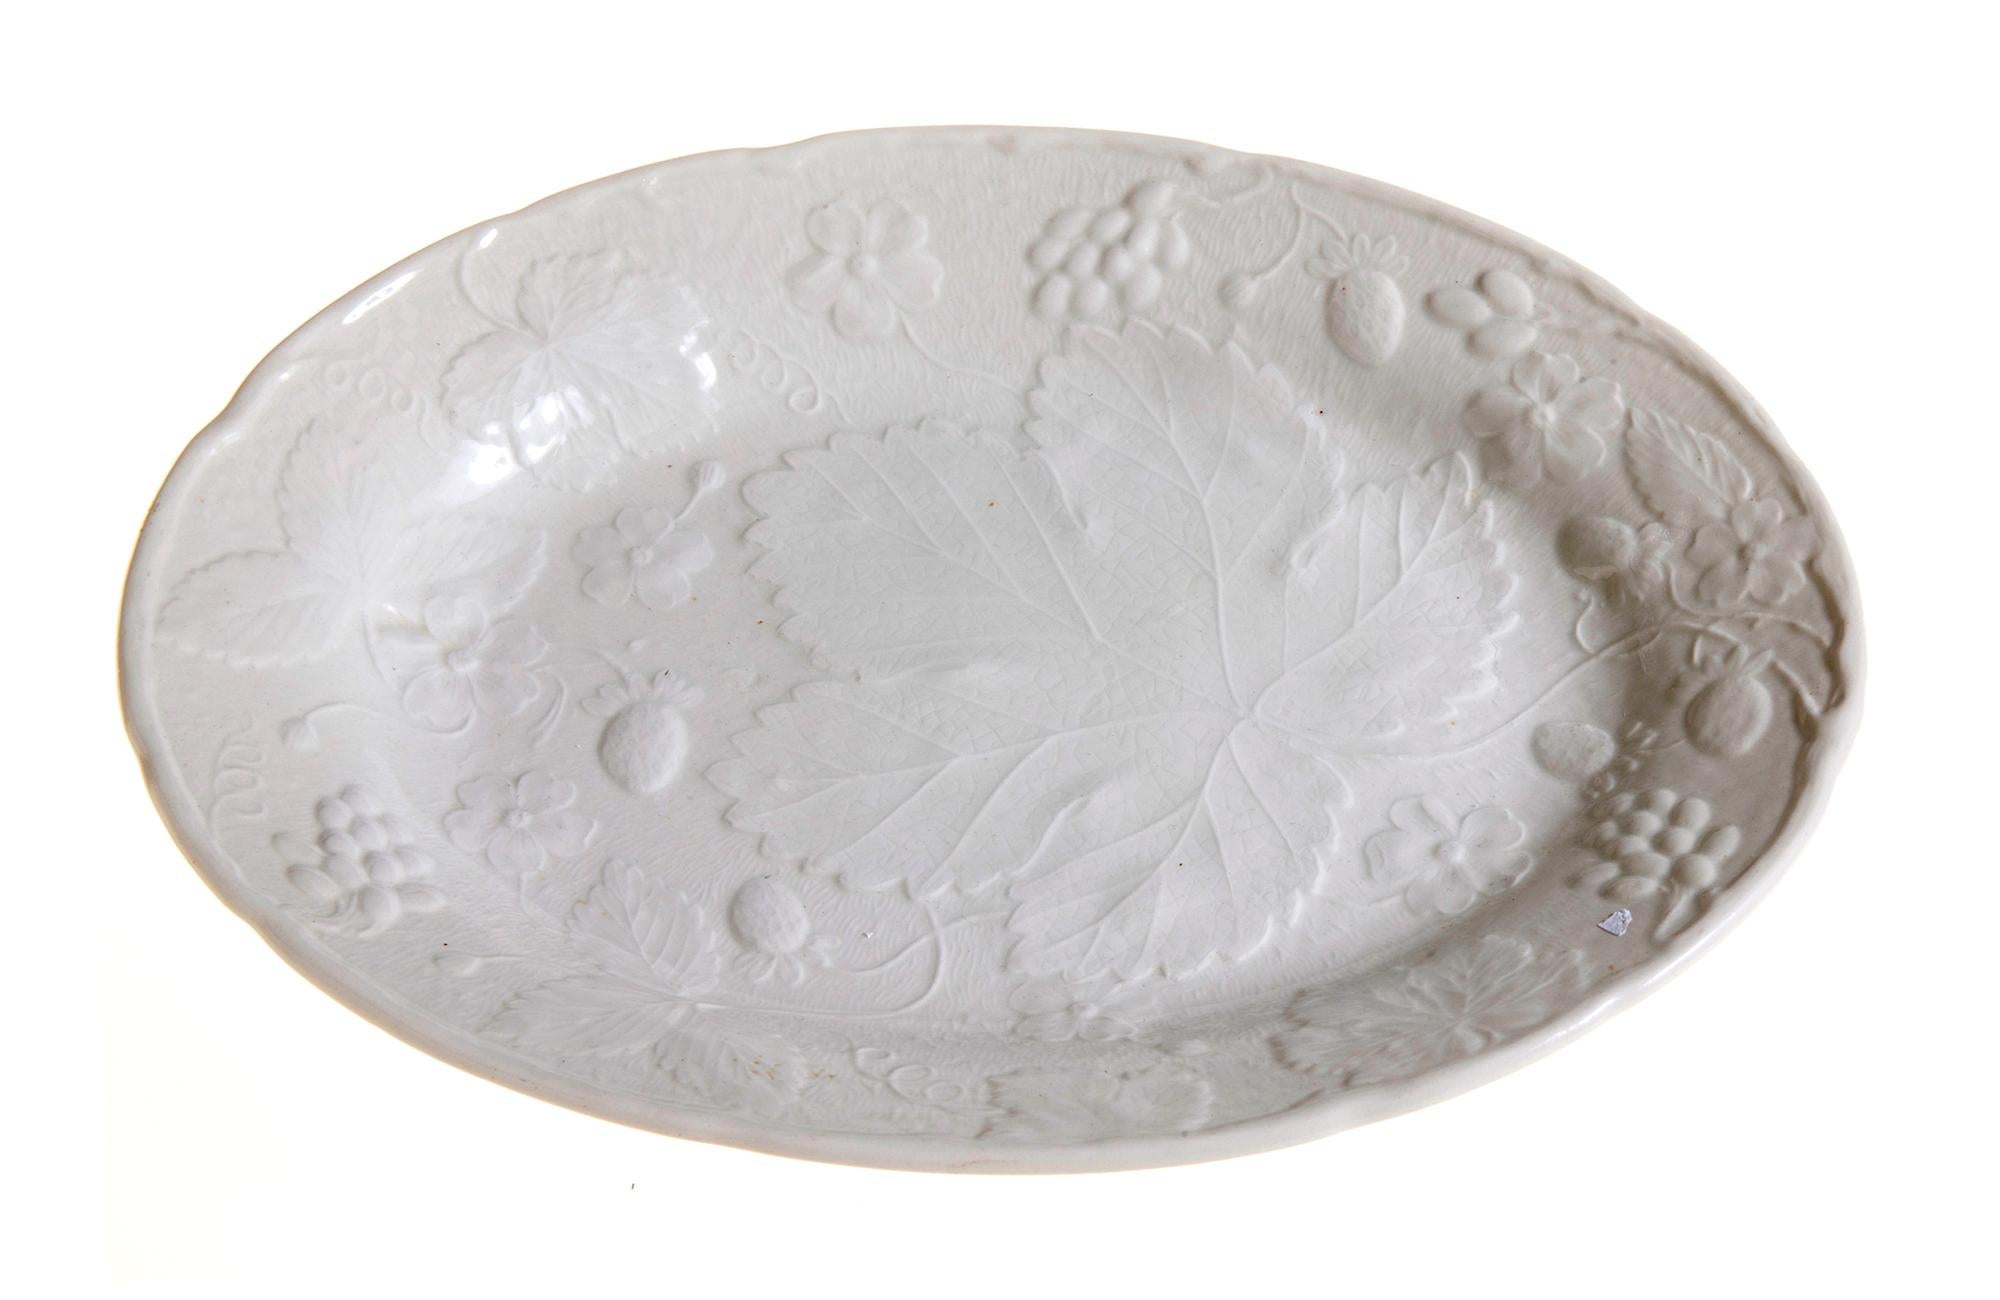 Burgess & Leigh English ironstone small platter in the Davenport pattern with strawberry and grape leaf design.